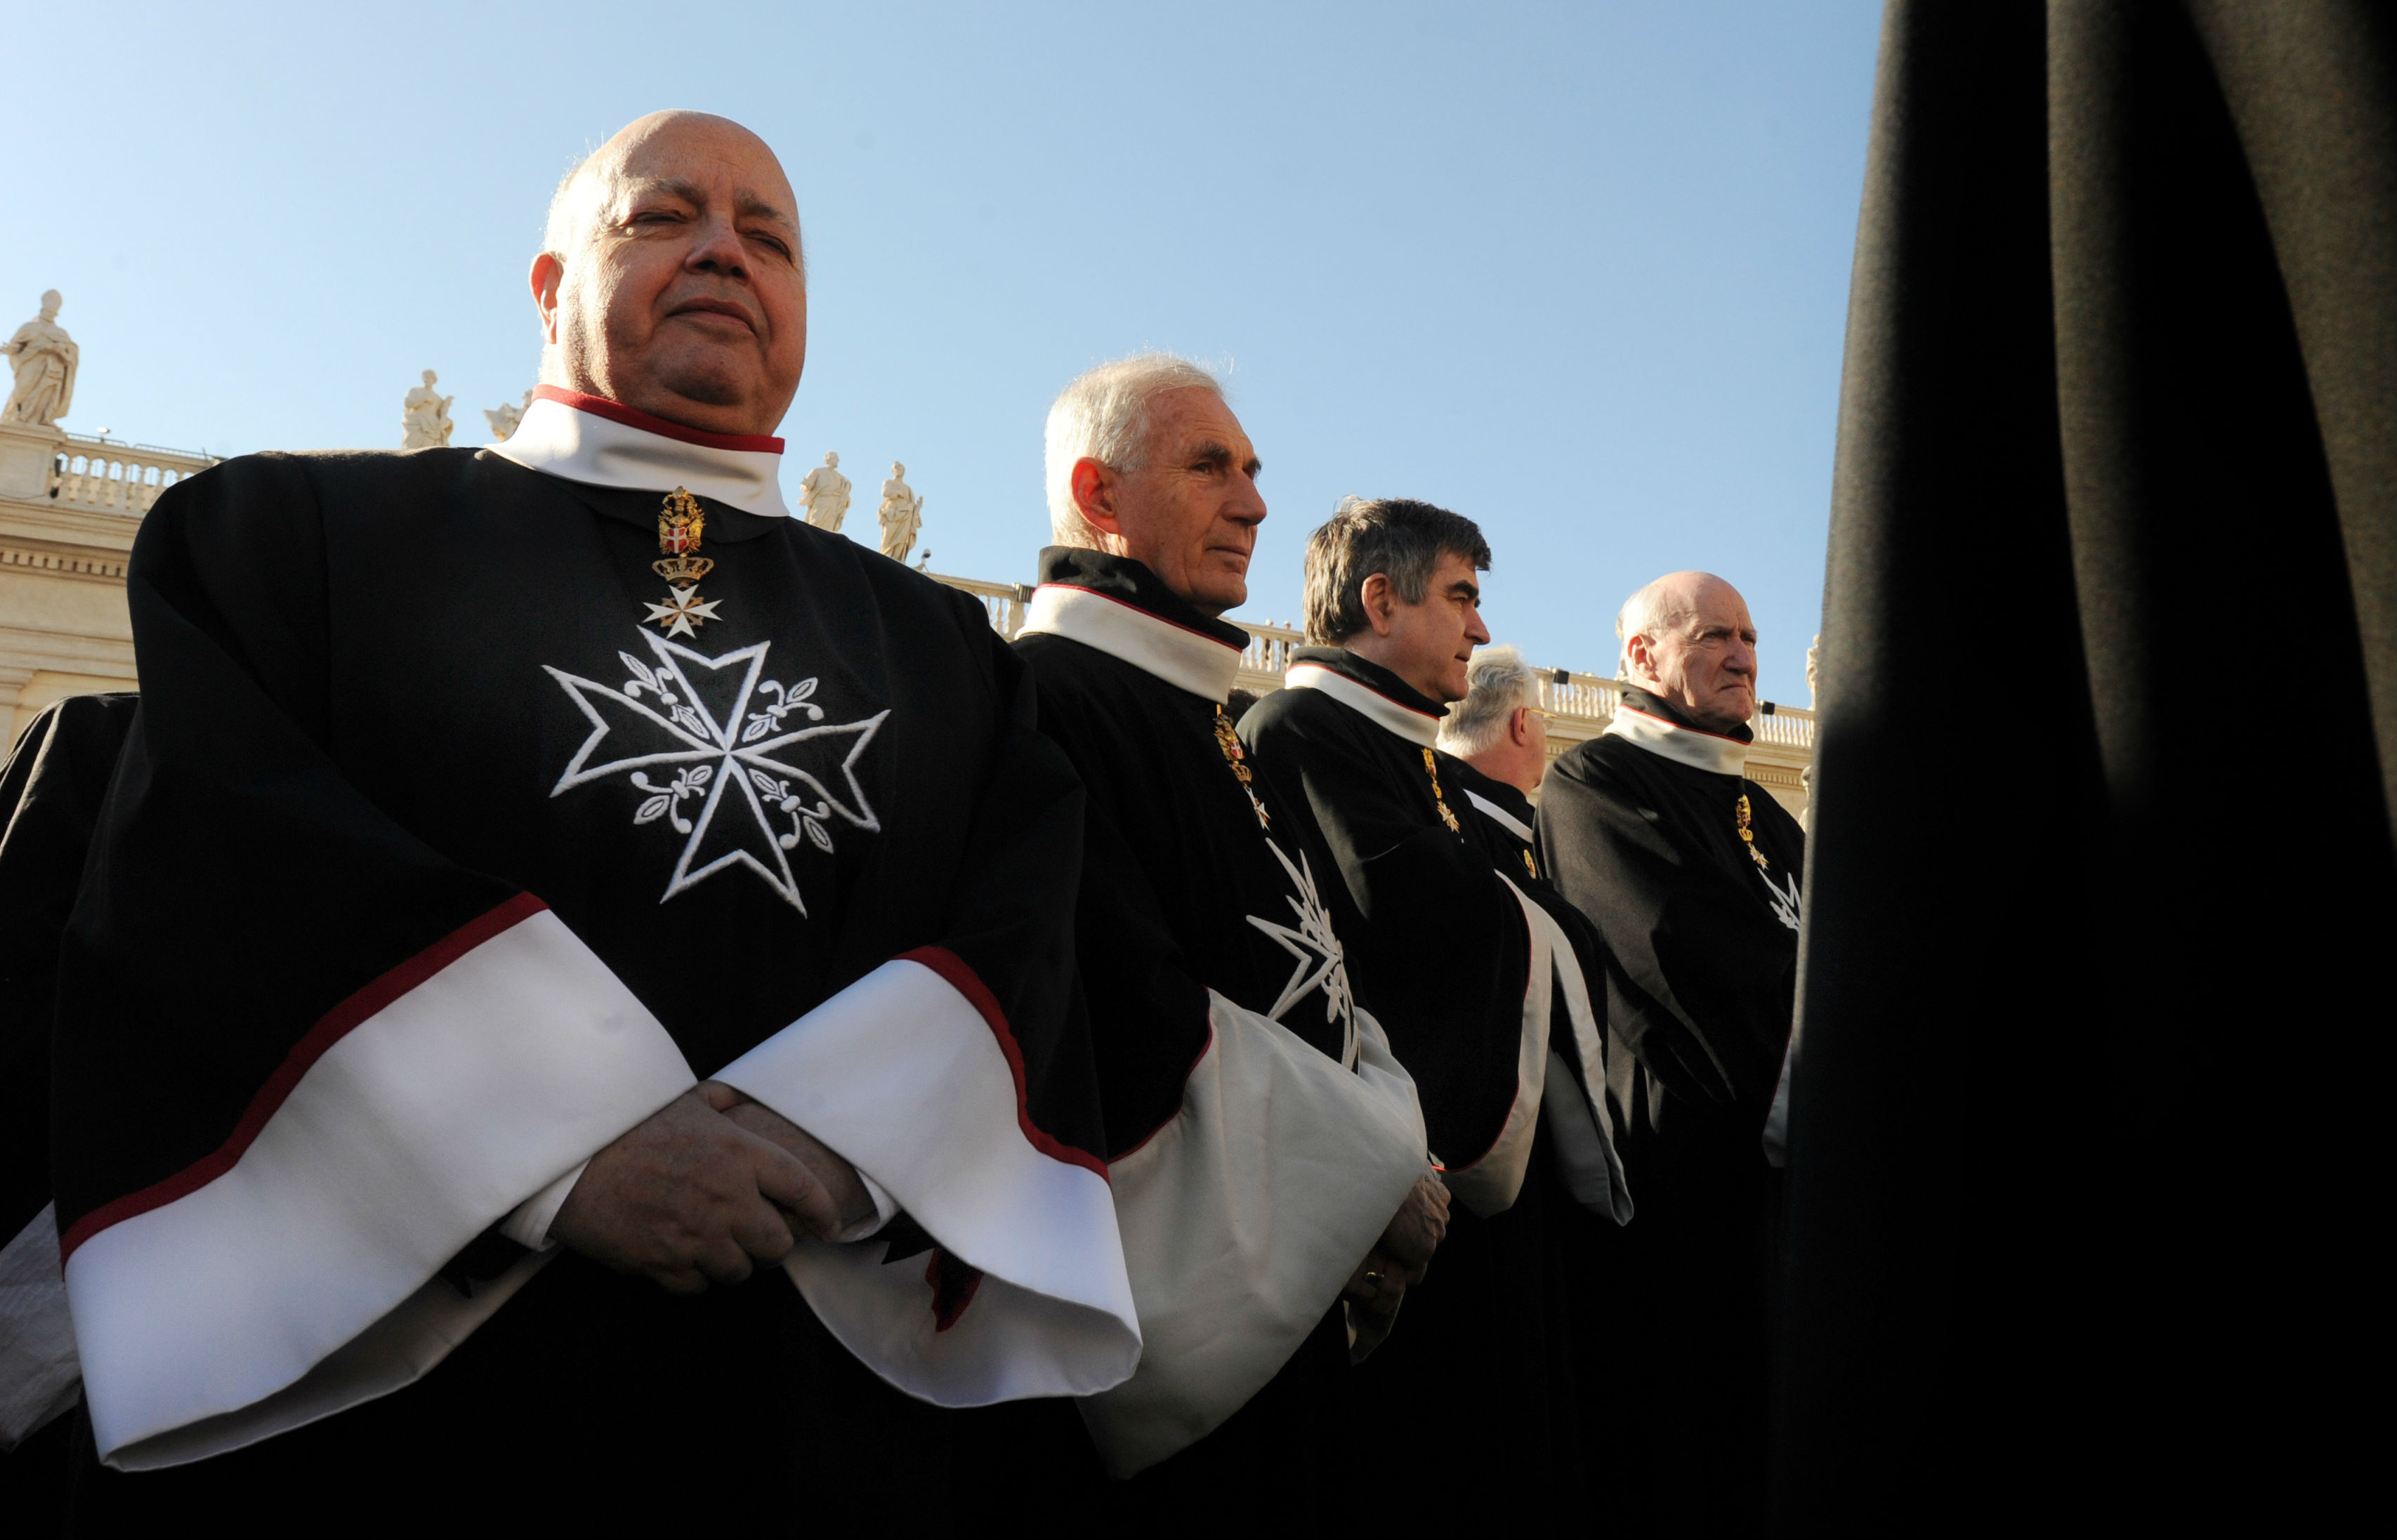 Pope blocks recruitment as Knights of Malta tussle for control of order